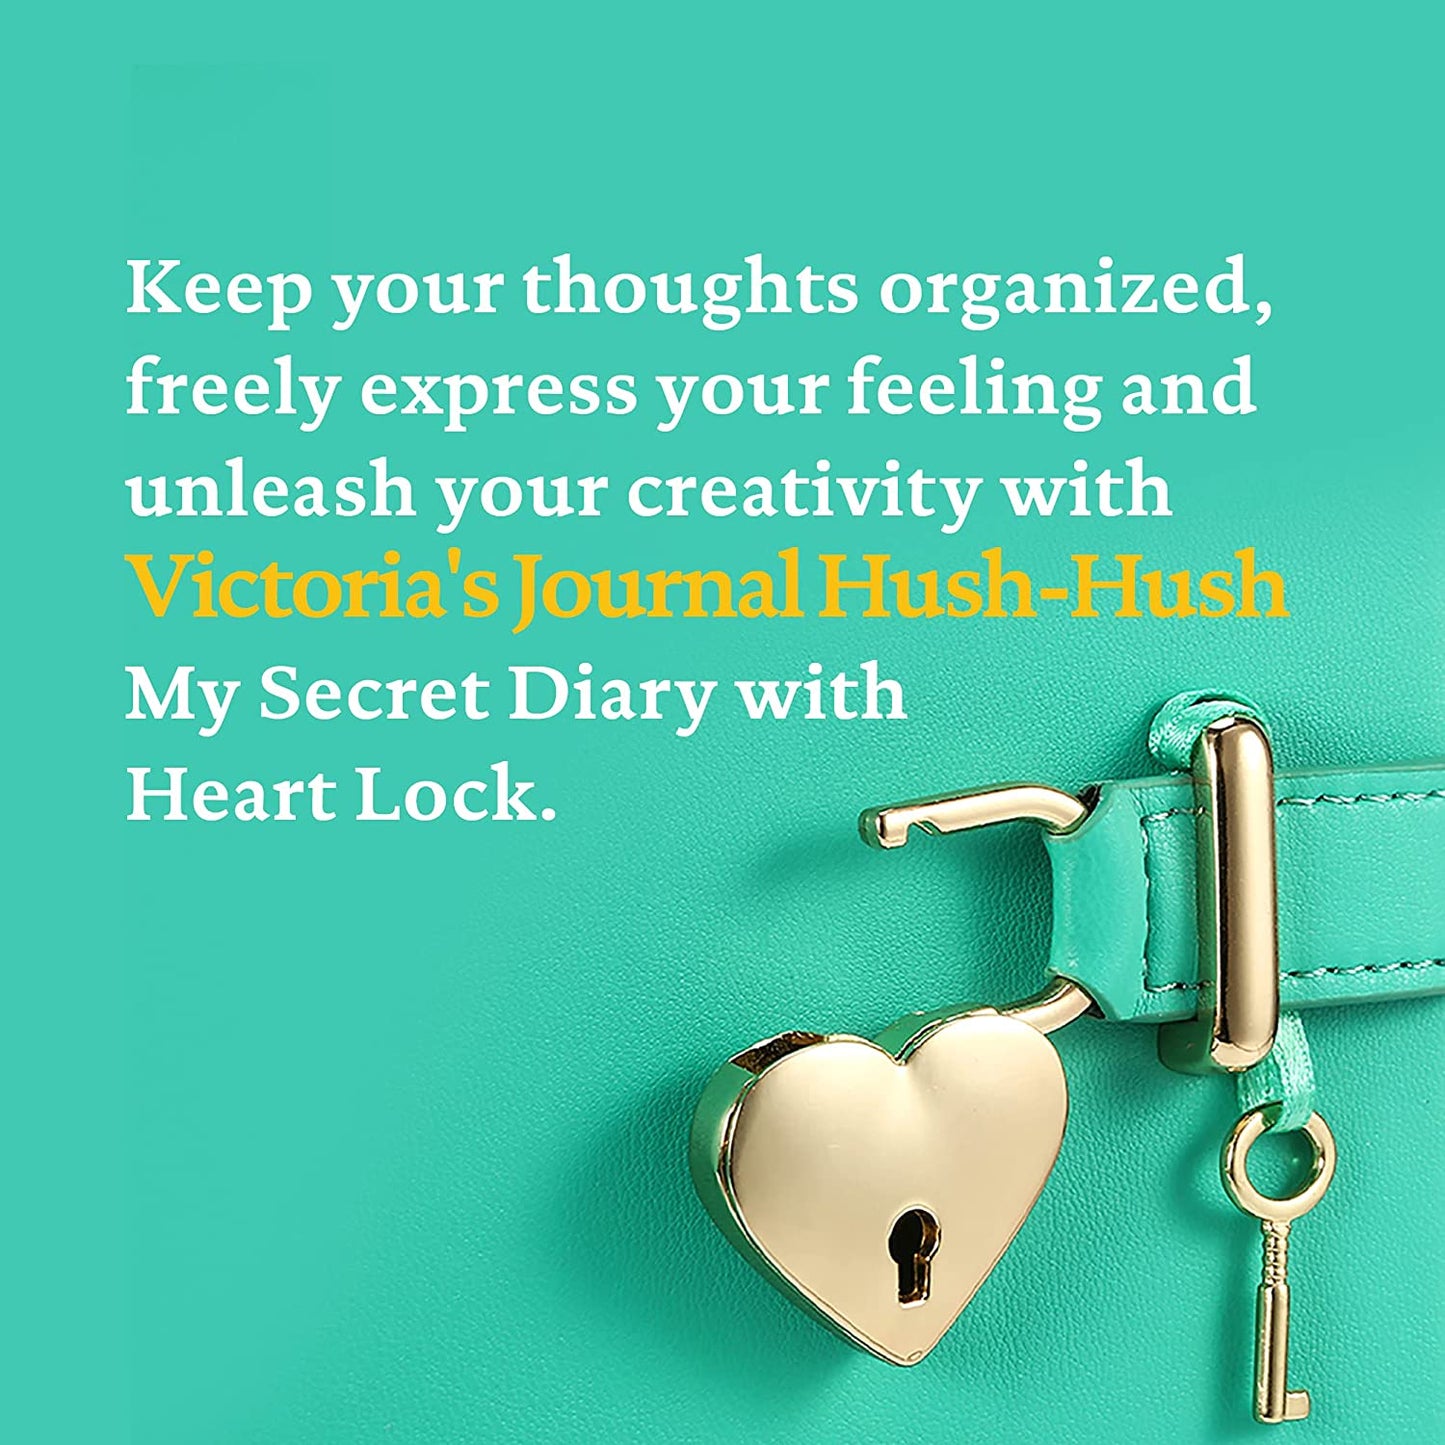 Heart Shaped Lock Journal, Lock Diary for Girls with Key, Vegan Leather Cover, Cute Locking Secret Notebook for Teens, 5.3x7.3",320p Victoria's Journals Secret Diary, College-ruled (Mint Green)